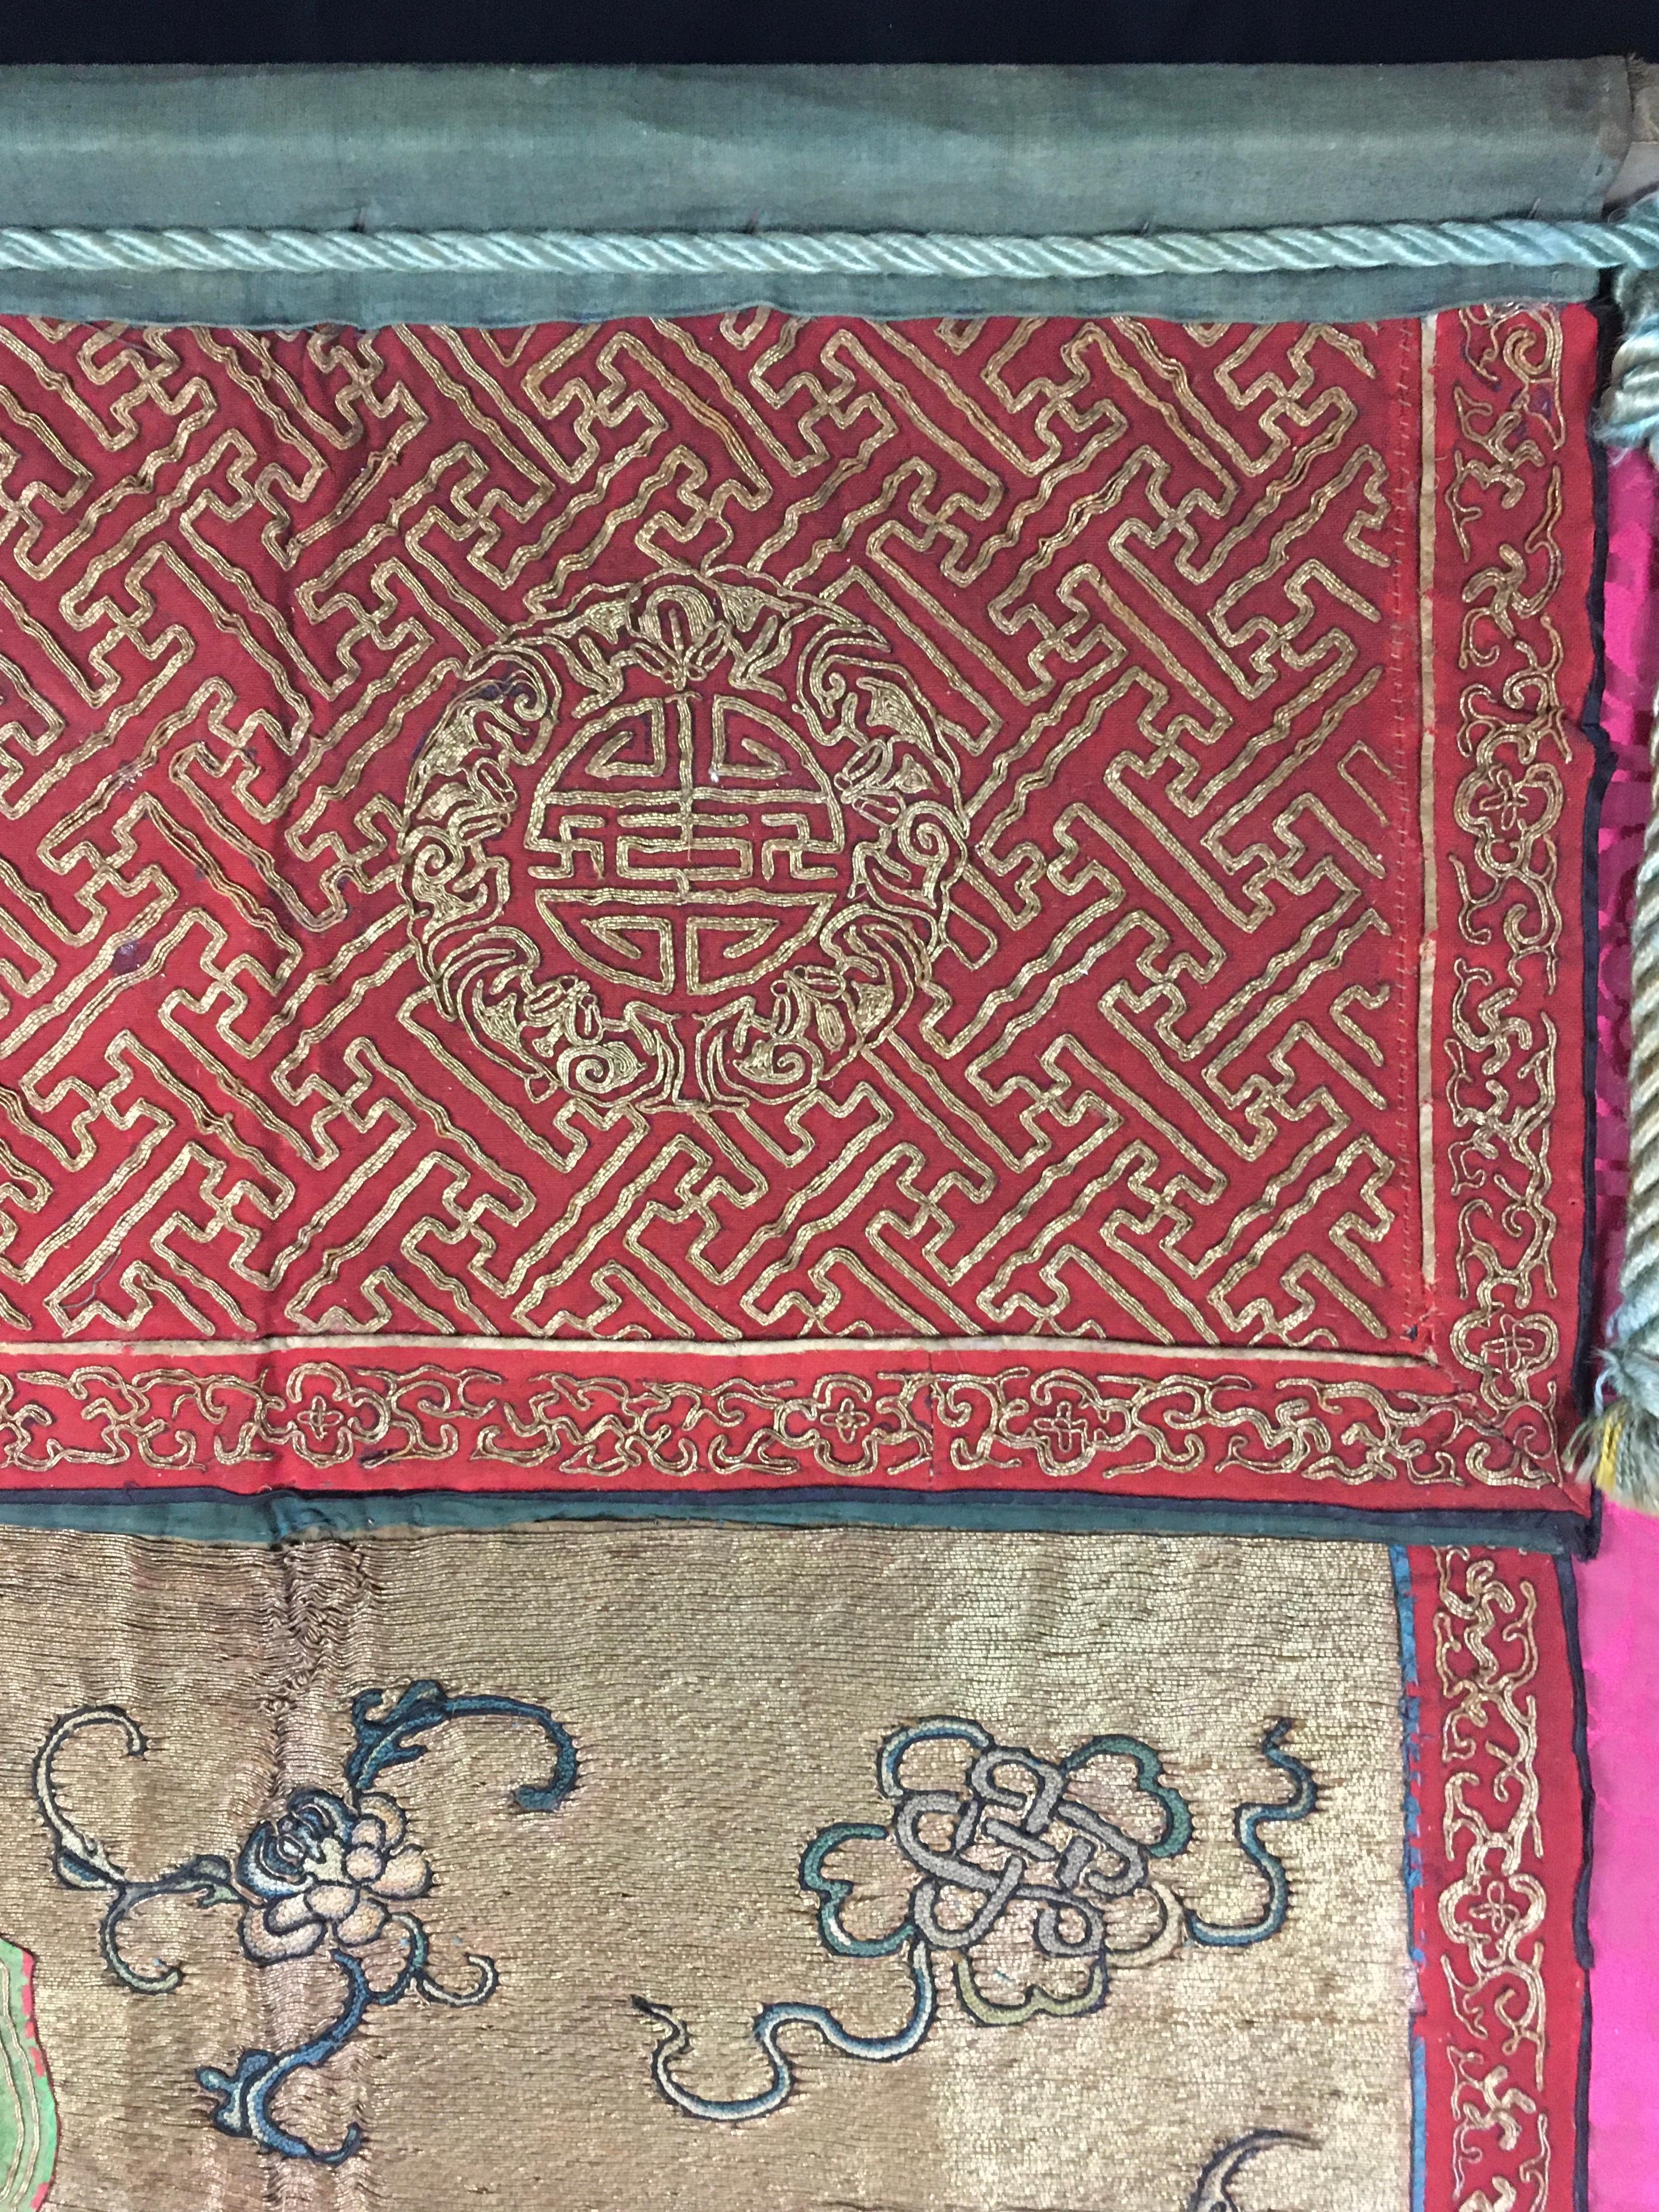 Qing Dynasty Period Gold and Red Embroidered Asian Portiere/Wall Hanging 5